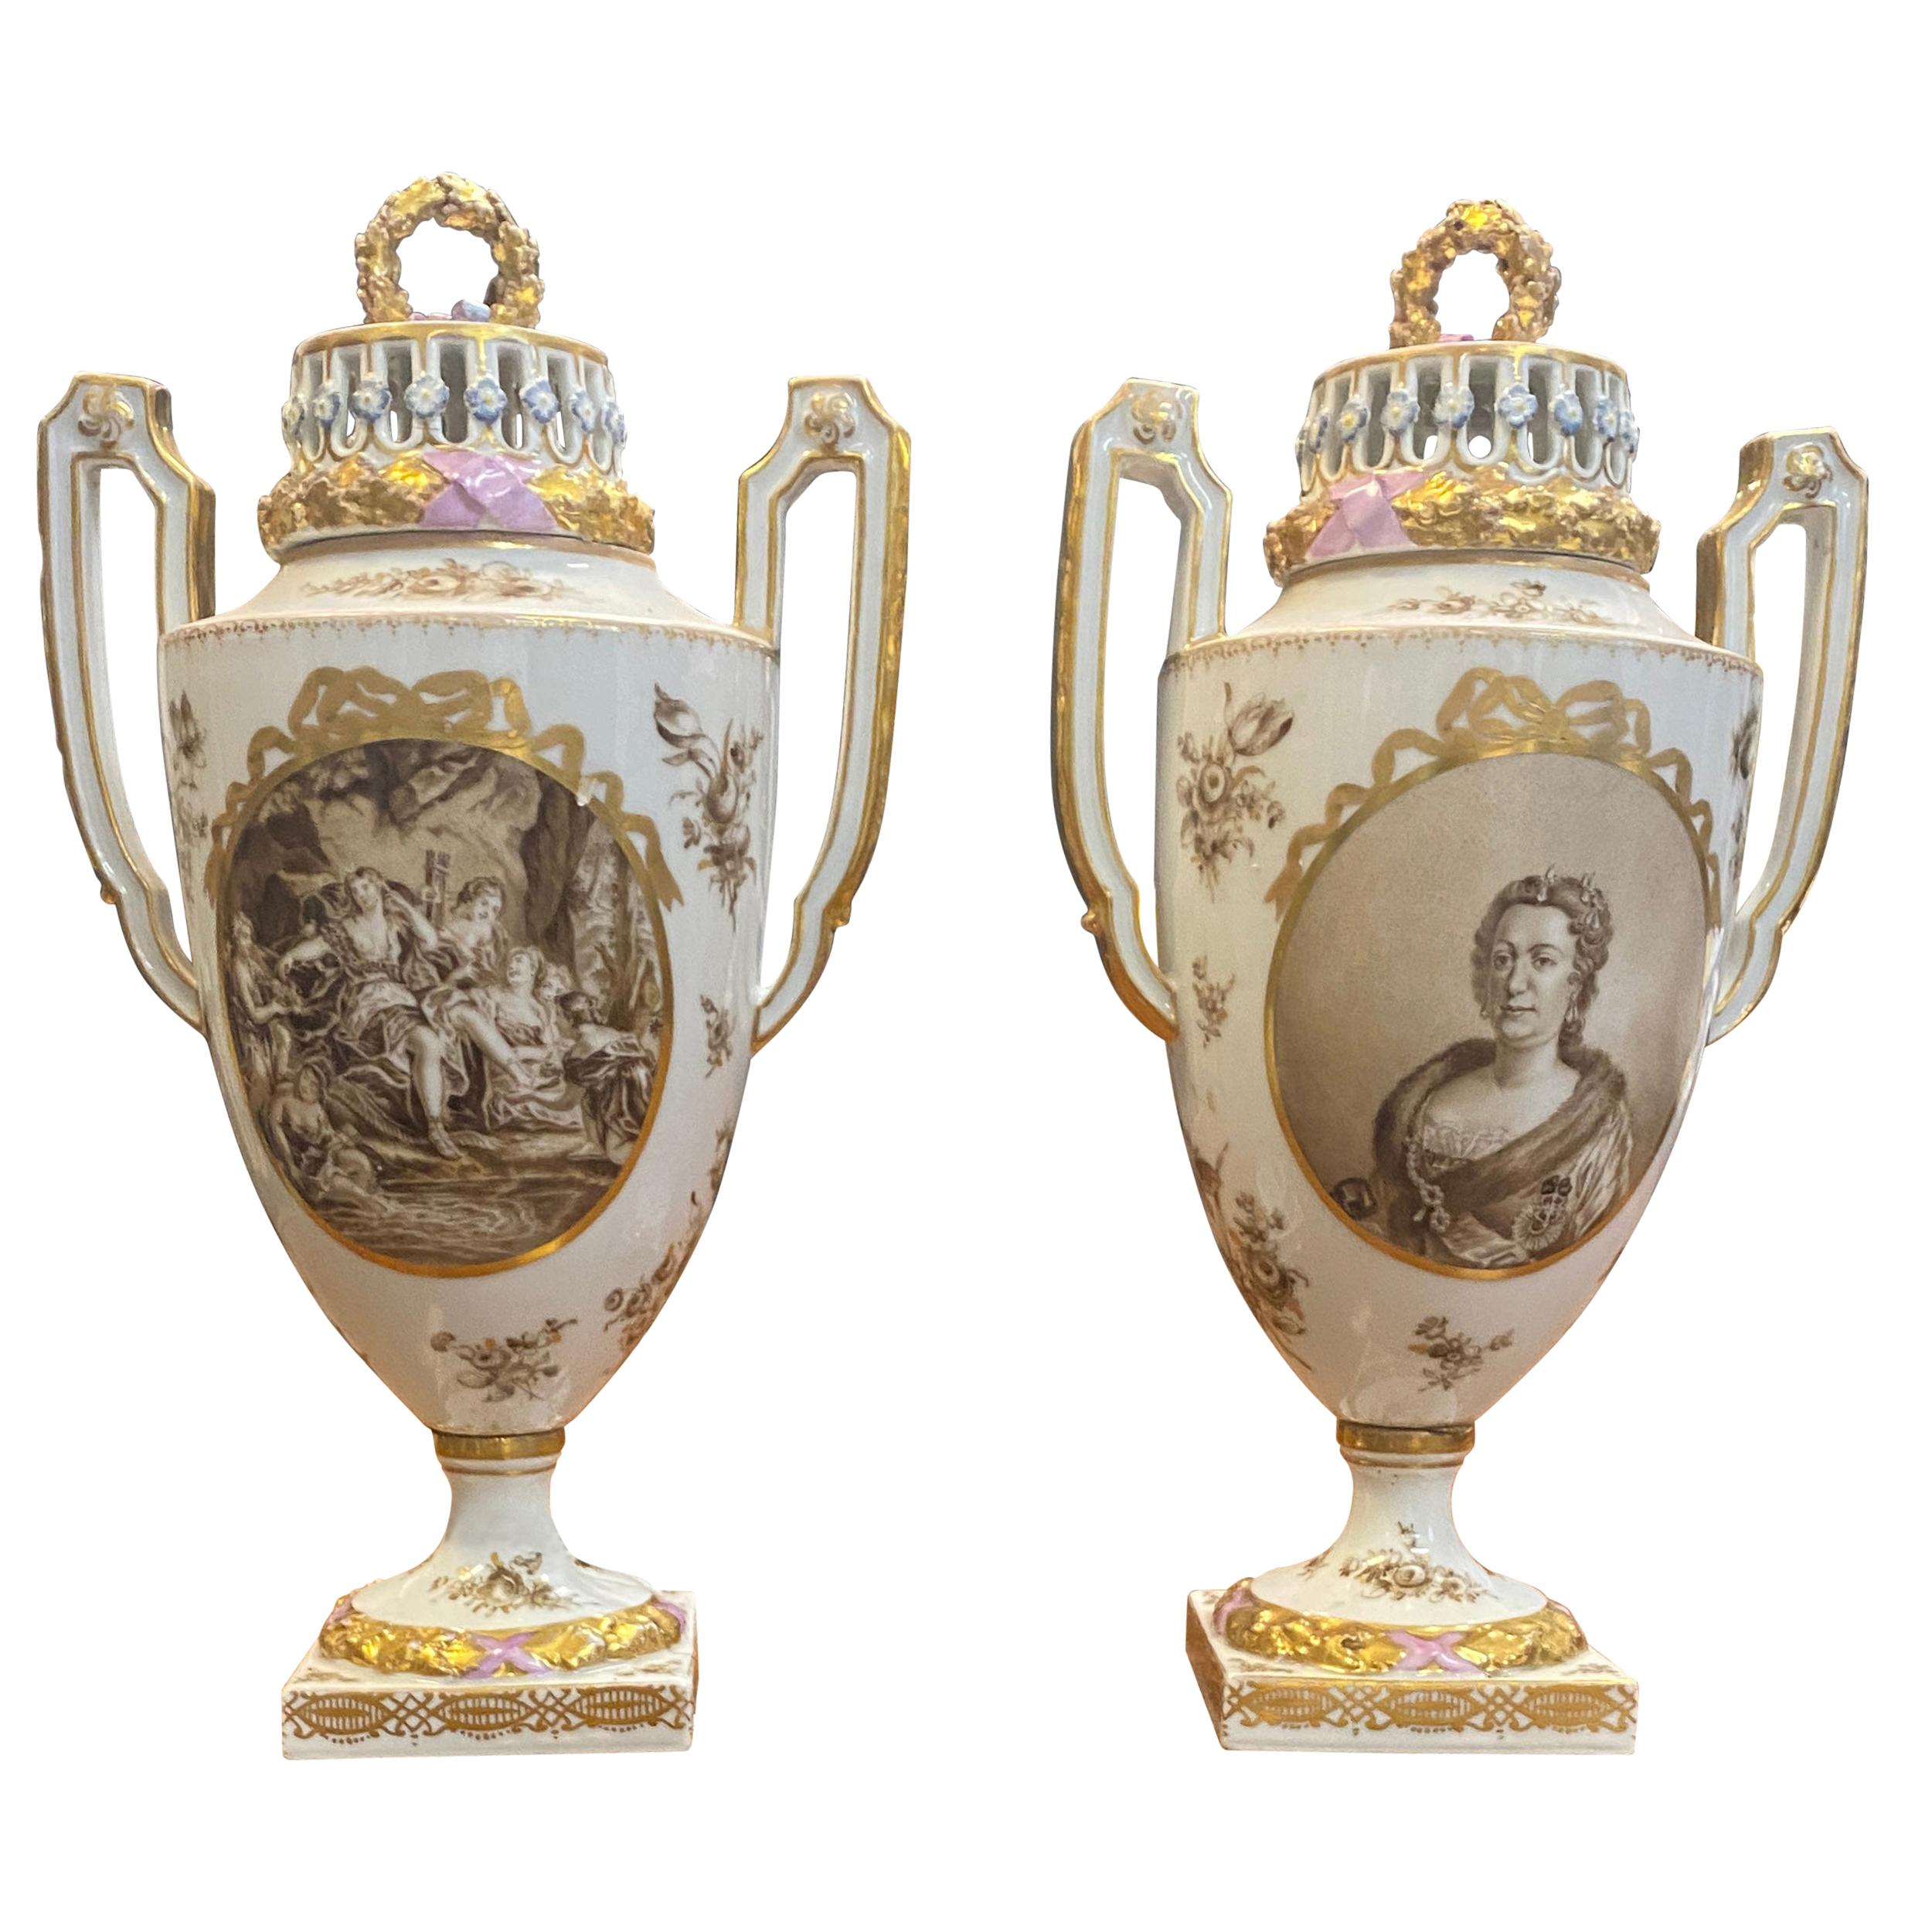 Pair of porcelain covered potpourri urns
Each with royal style portraits on front, mythological scenes on rear, stylized reticulated dome tops with wreath finials,
large handles, on pedestal bases, heavily gilded and in relief.
Measures: Height